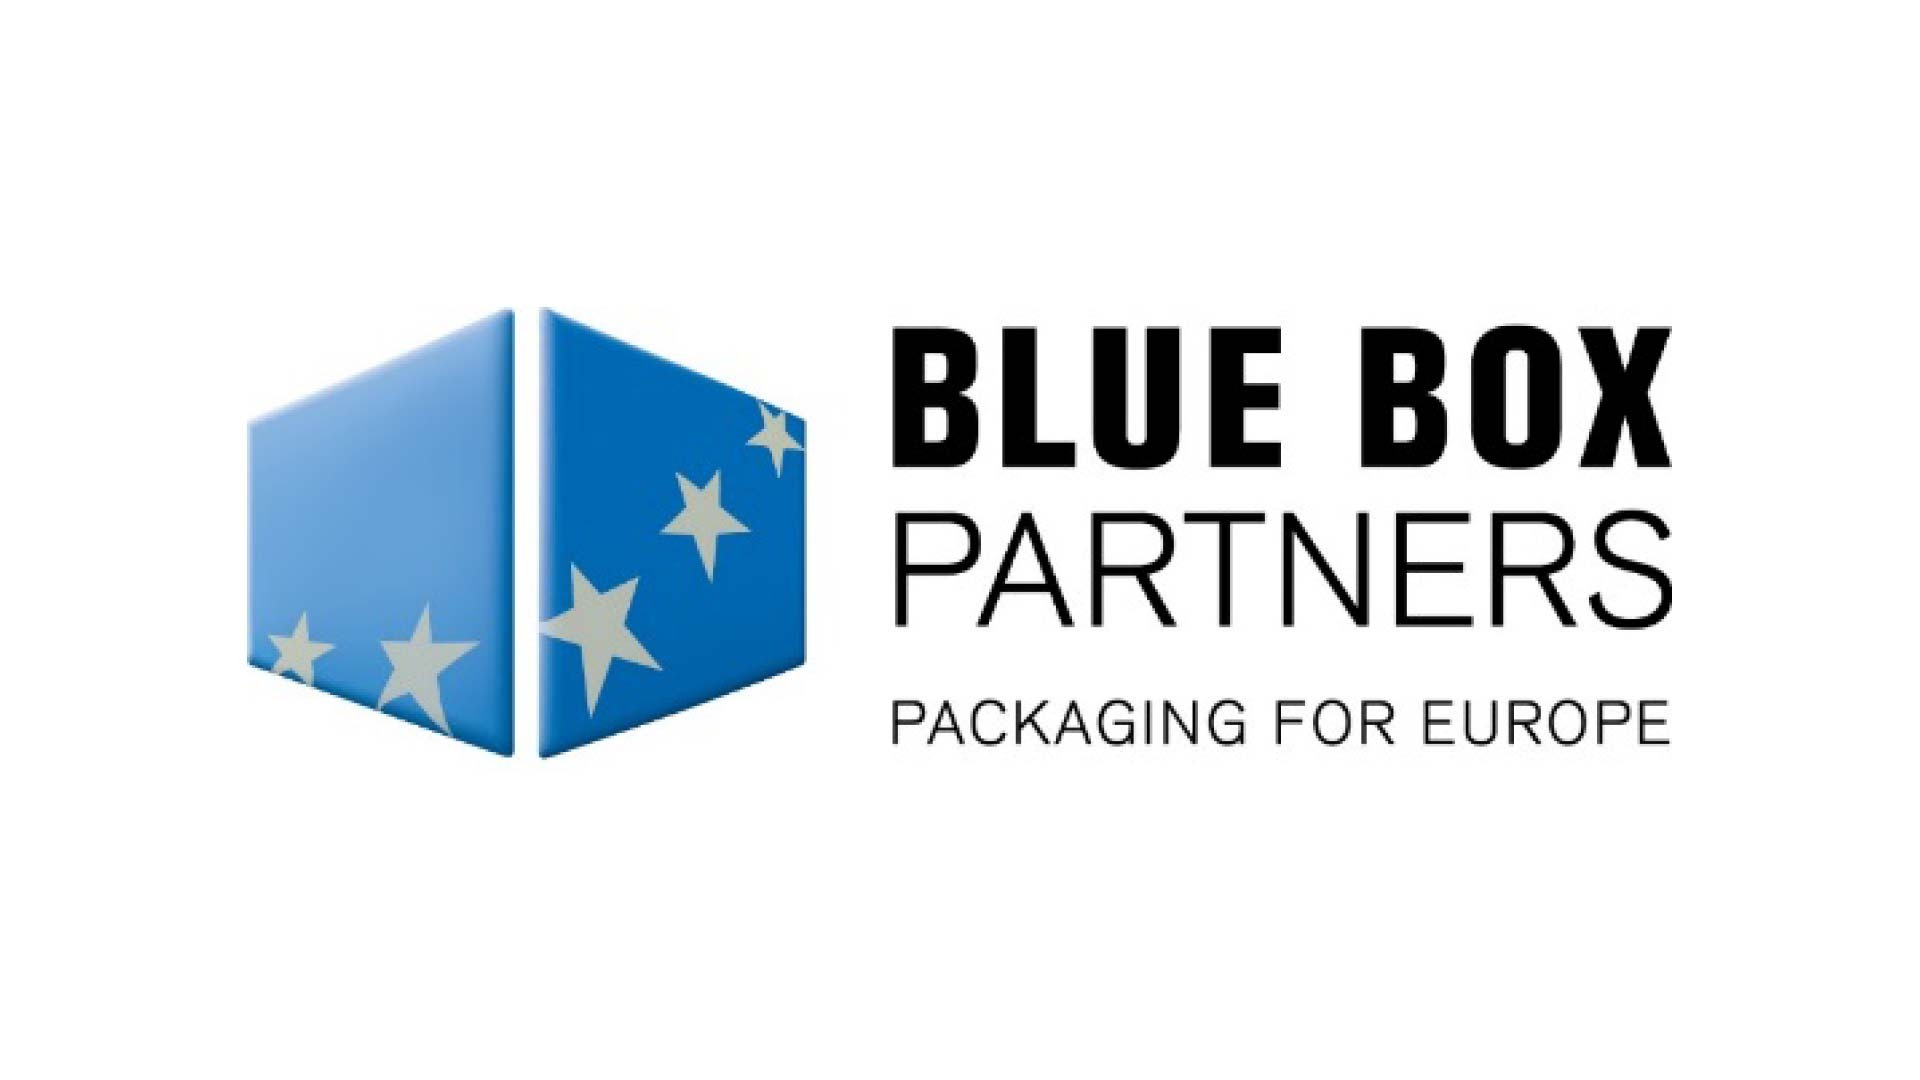 Blue Box Partners is Evolving its Customer Service in Spain